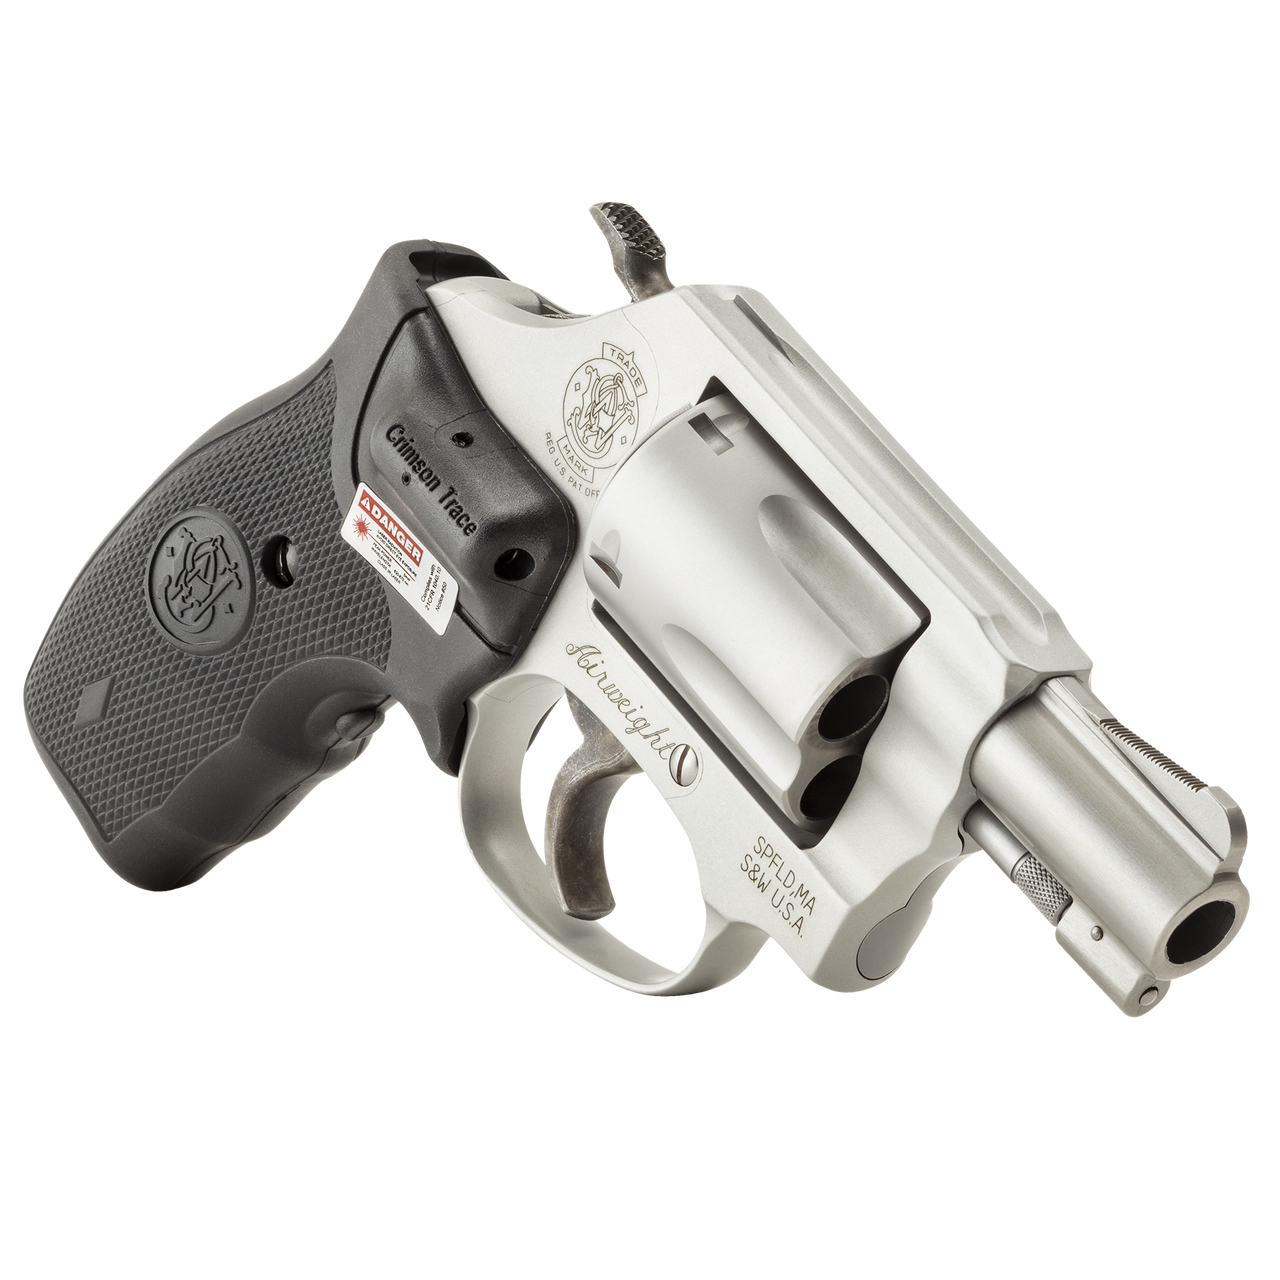 Gunners Firearms LLC  Smith & Wesson Model 637, Double Action, Small  Revolver, 38 Special, 1.875 Barrel, Alloy Frame, Stainless Finish, Laser  Grip, Fixed Sights, 5Rd, Crimson Trace Laser 163052